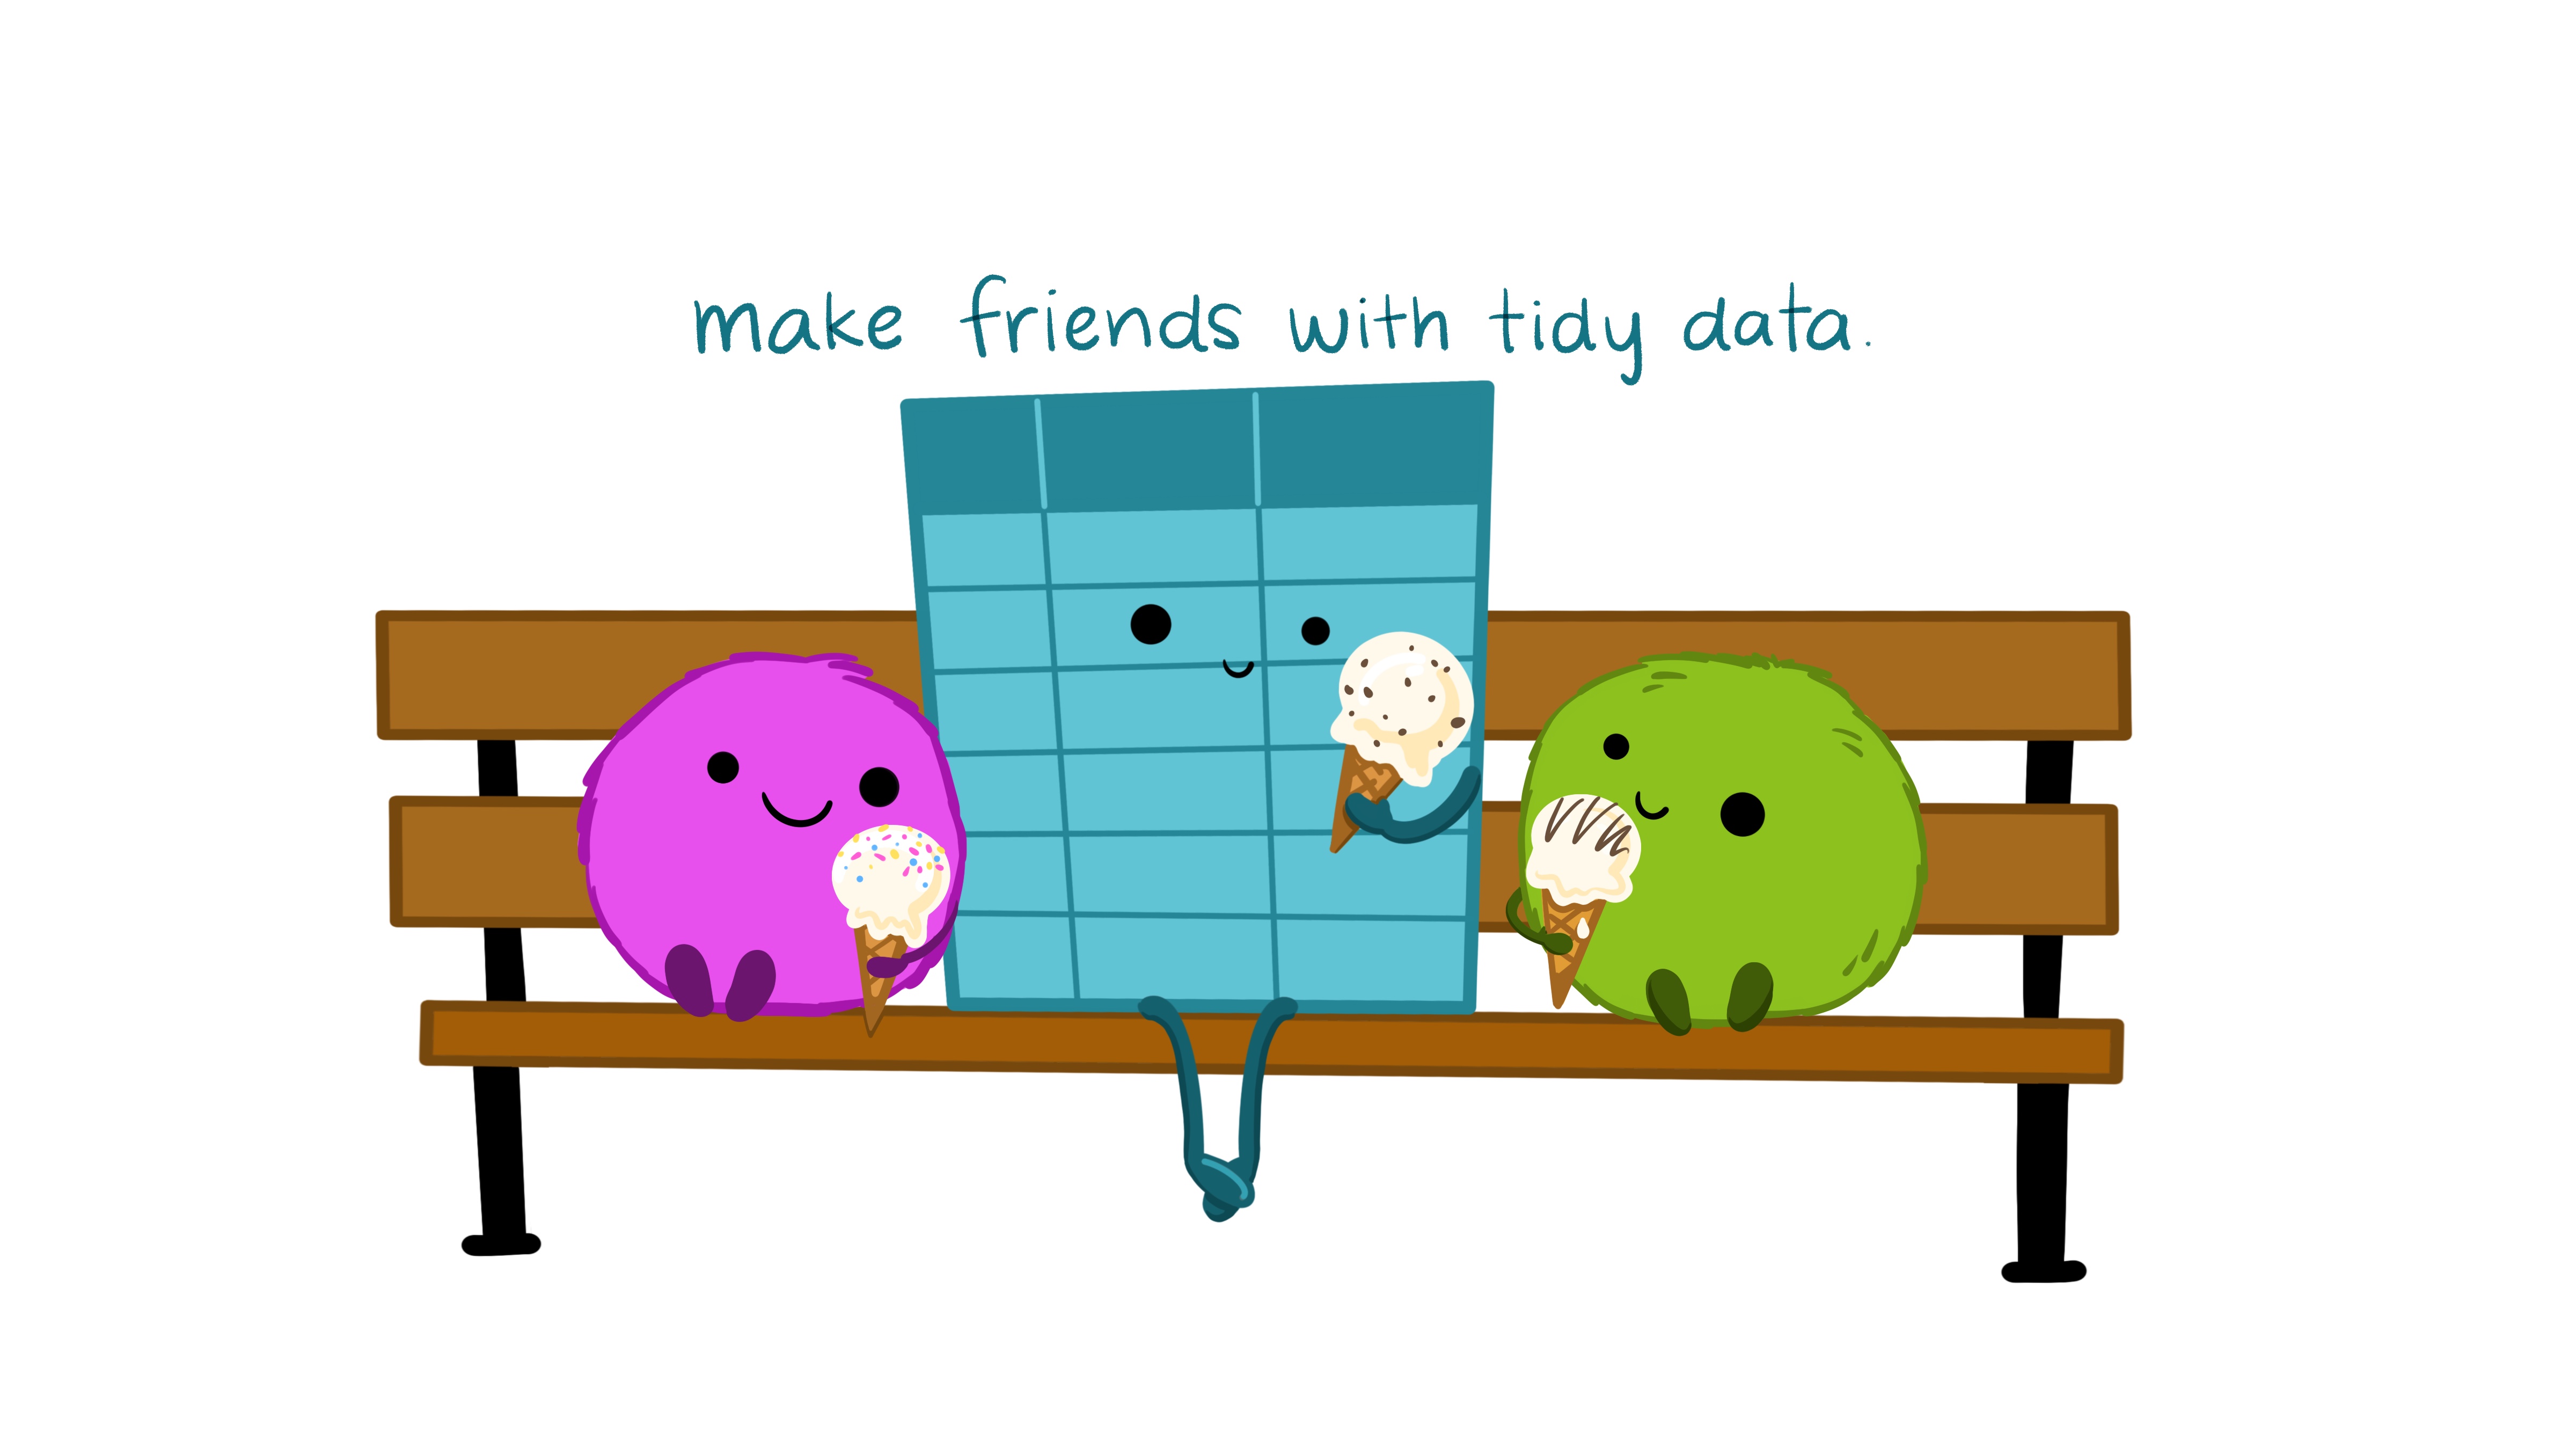 Digital illustration of two cute fuzzy monsters sitting on a park bench with a smiling data table between them, all eating ice cream together. In text above the illustration are the hand drawn words 'make friends with tidy data'.